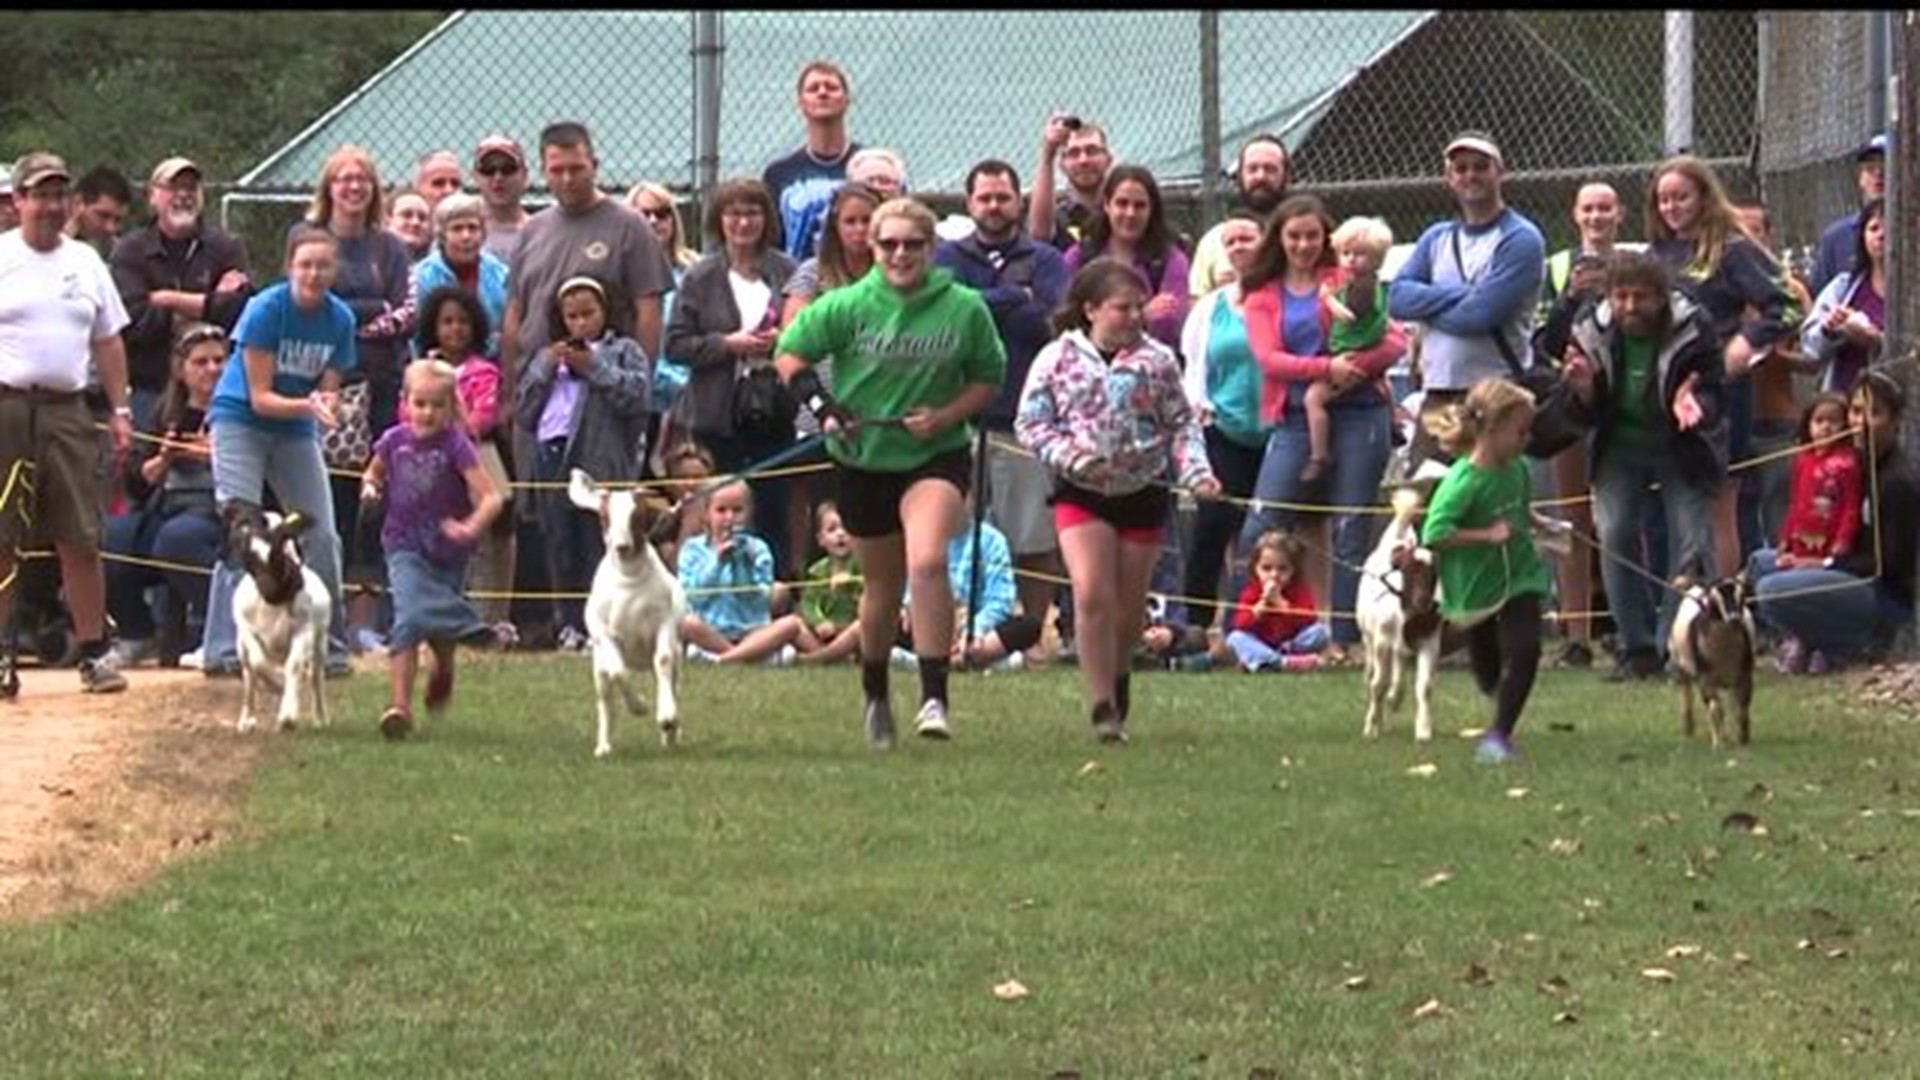 Annual "Running of the goats" held in Lancaster County